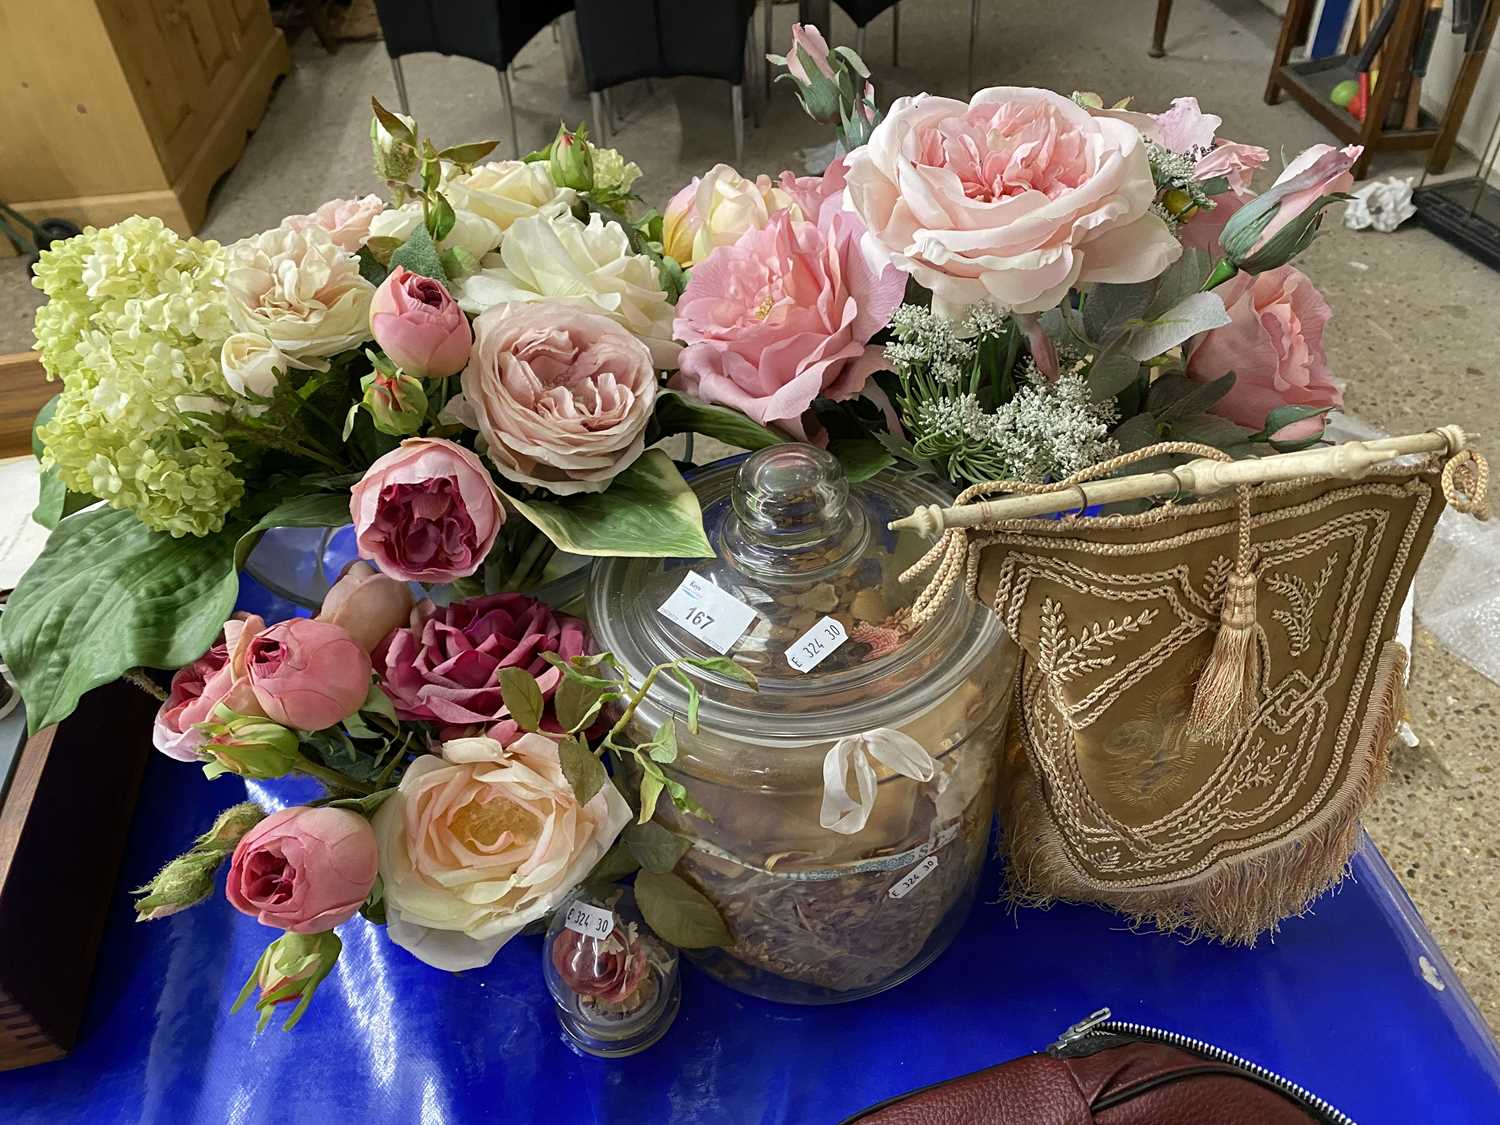 Vases, various fake flowers and other items